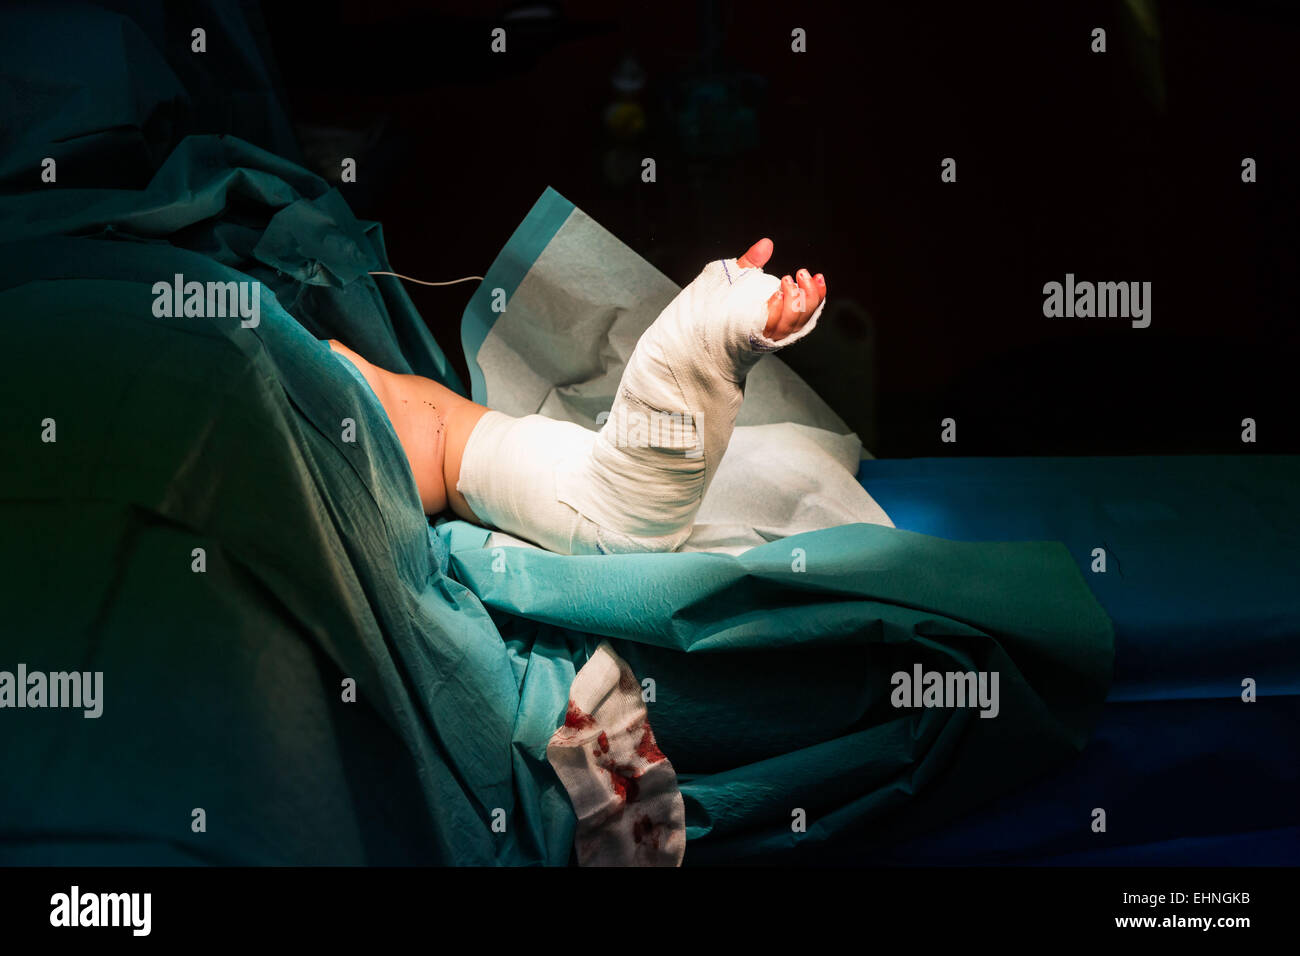 Laying a cast after hand surgery. Stock Photo